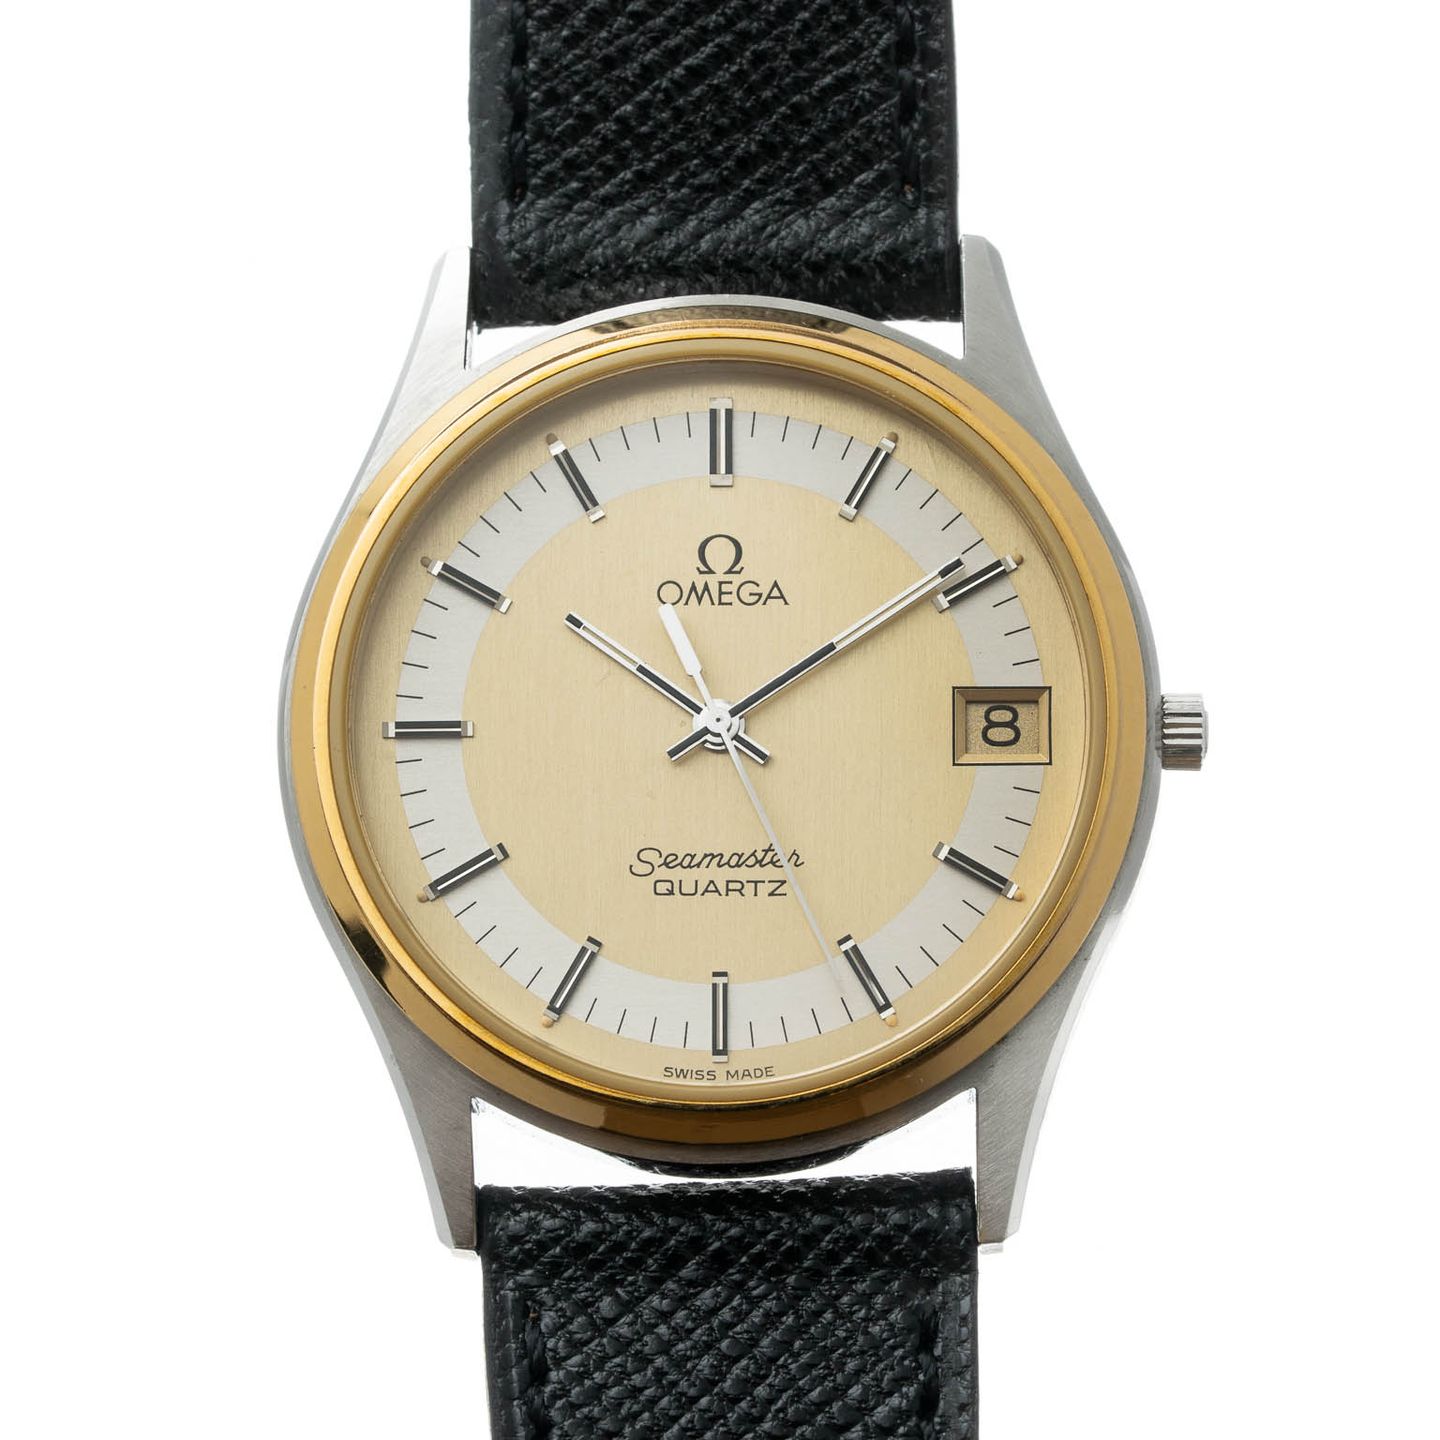 Omega Seamaster 196.0216 (1983) - Multi-colour dial 34 mm Gold/Steel case (1/8)